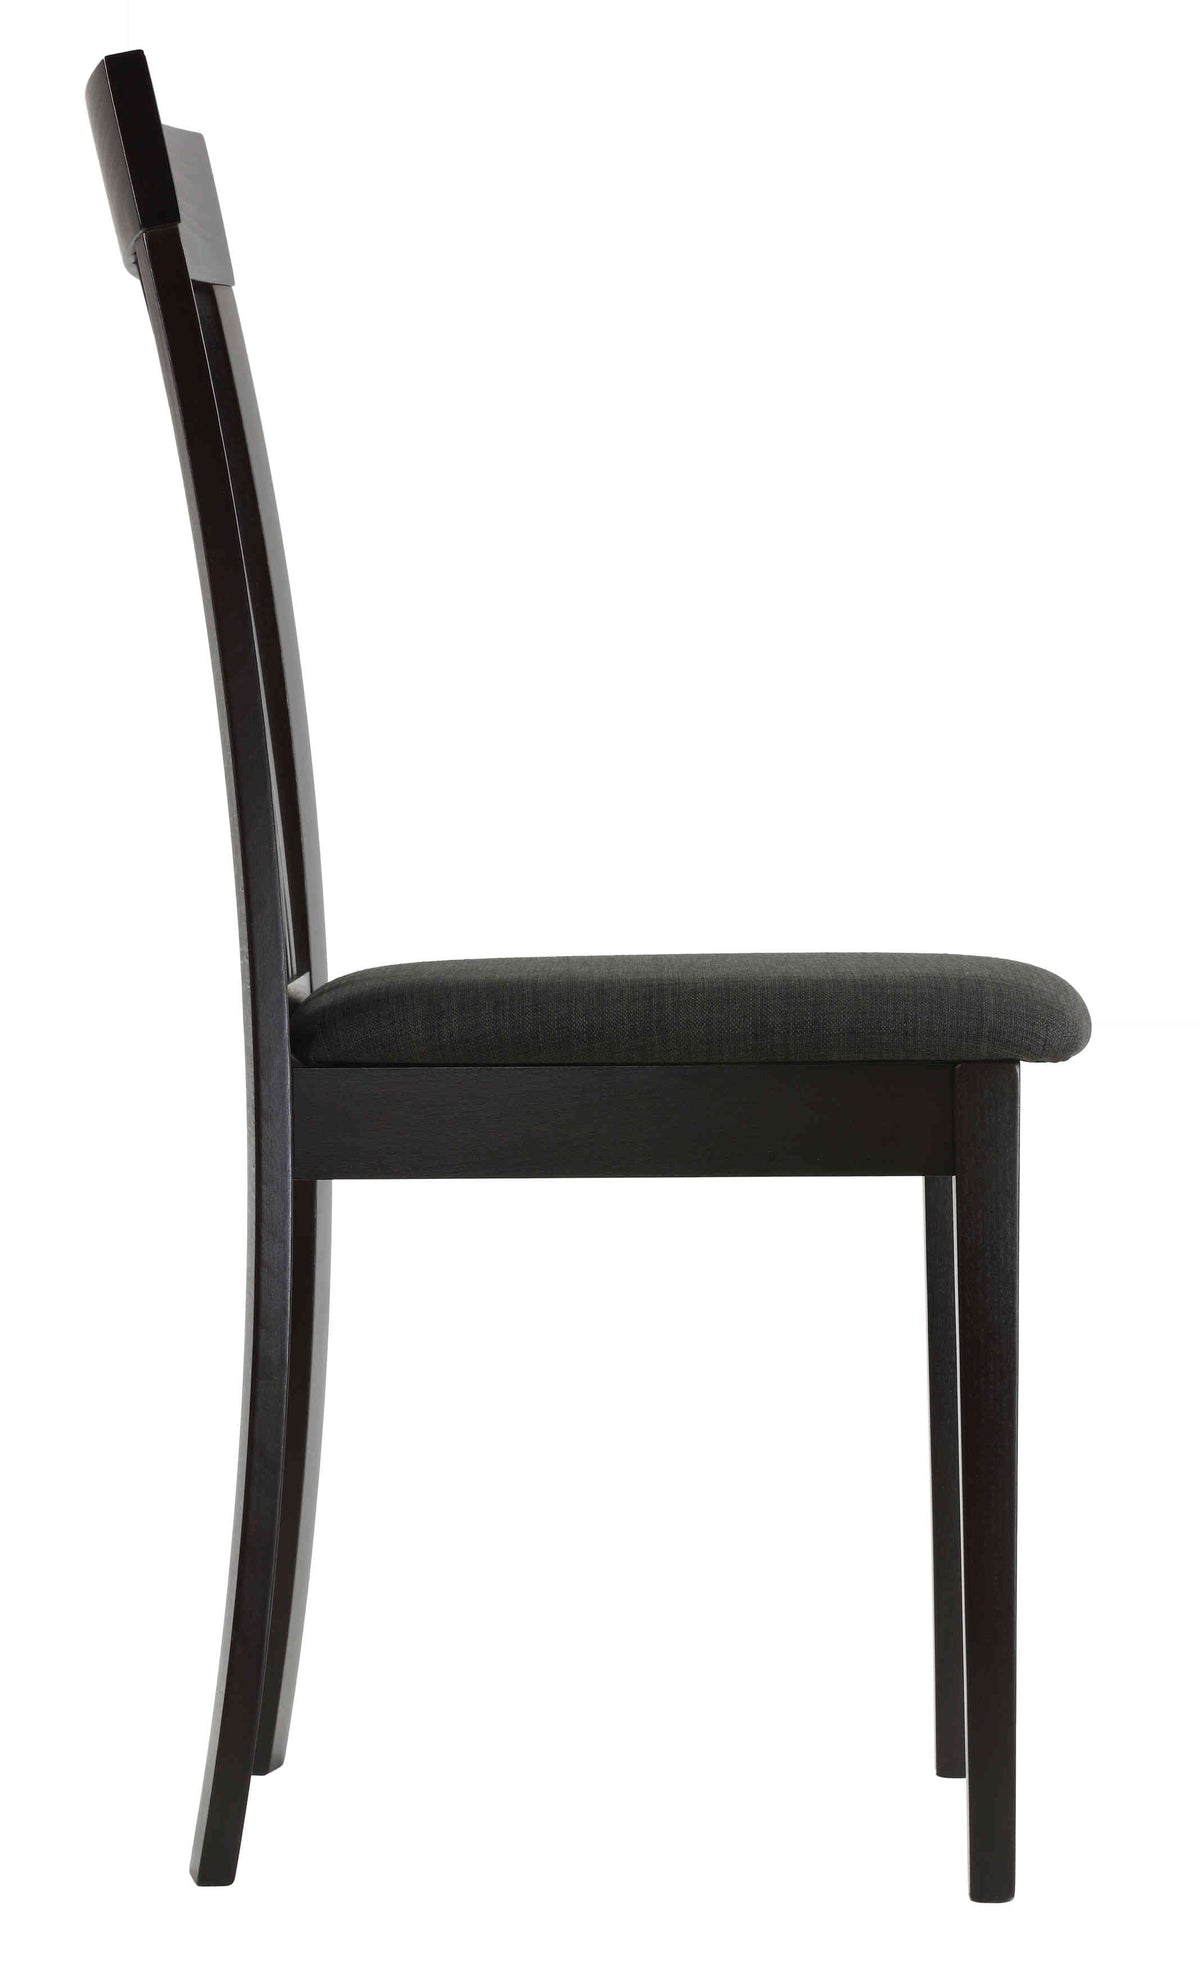 Cortesi Home Linnea Dining Chair in Charcoal Fabric, Cappuccino Finish (Set of 2)